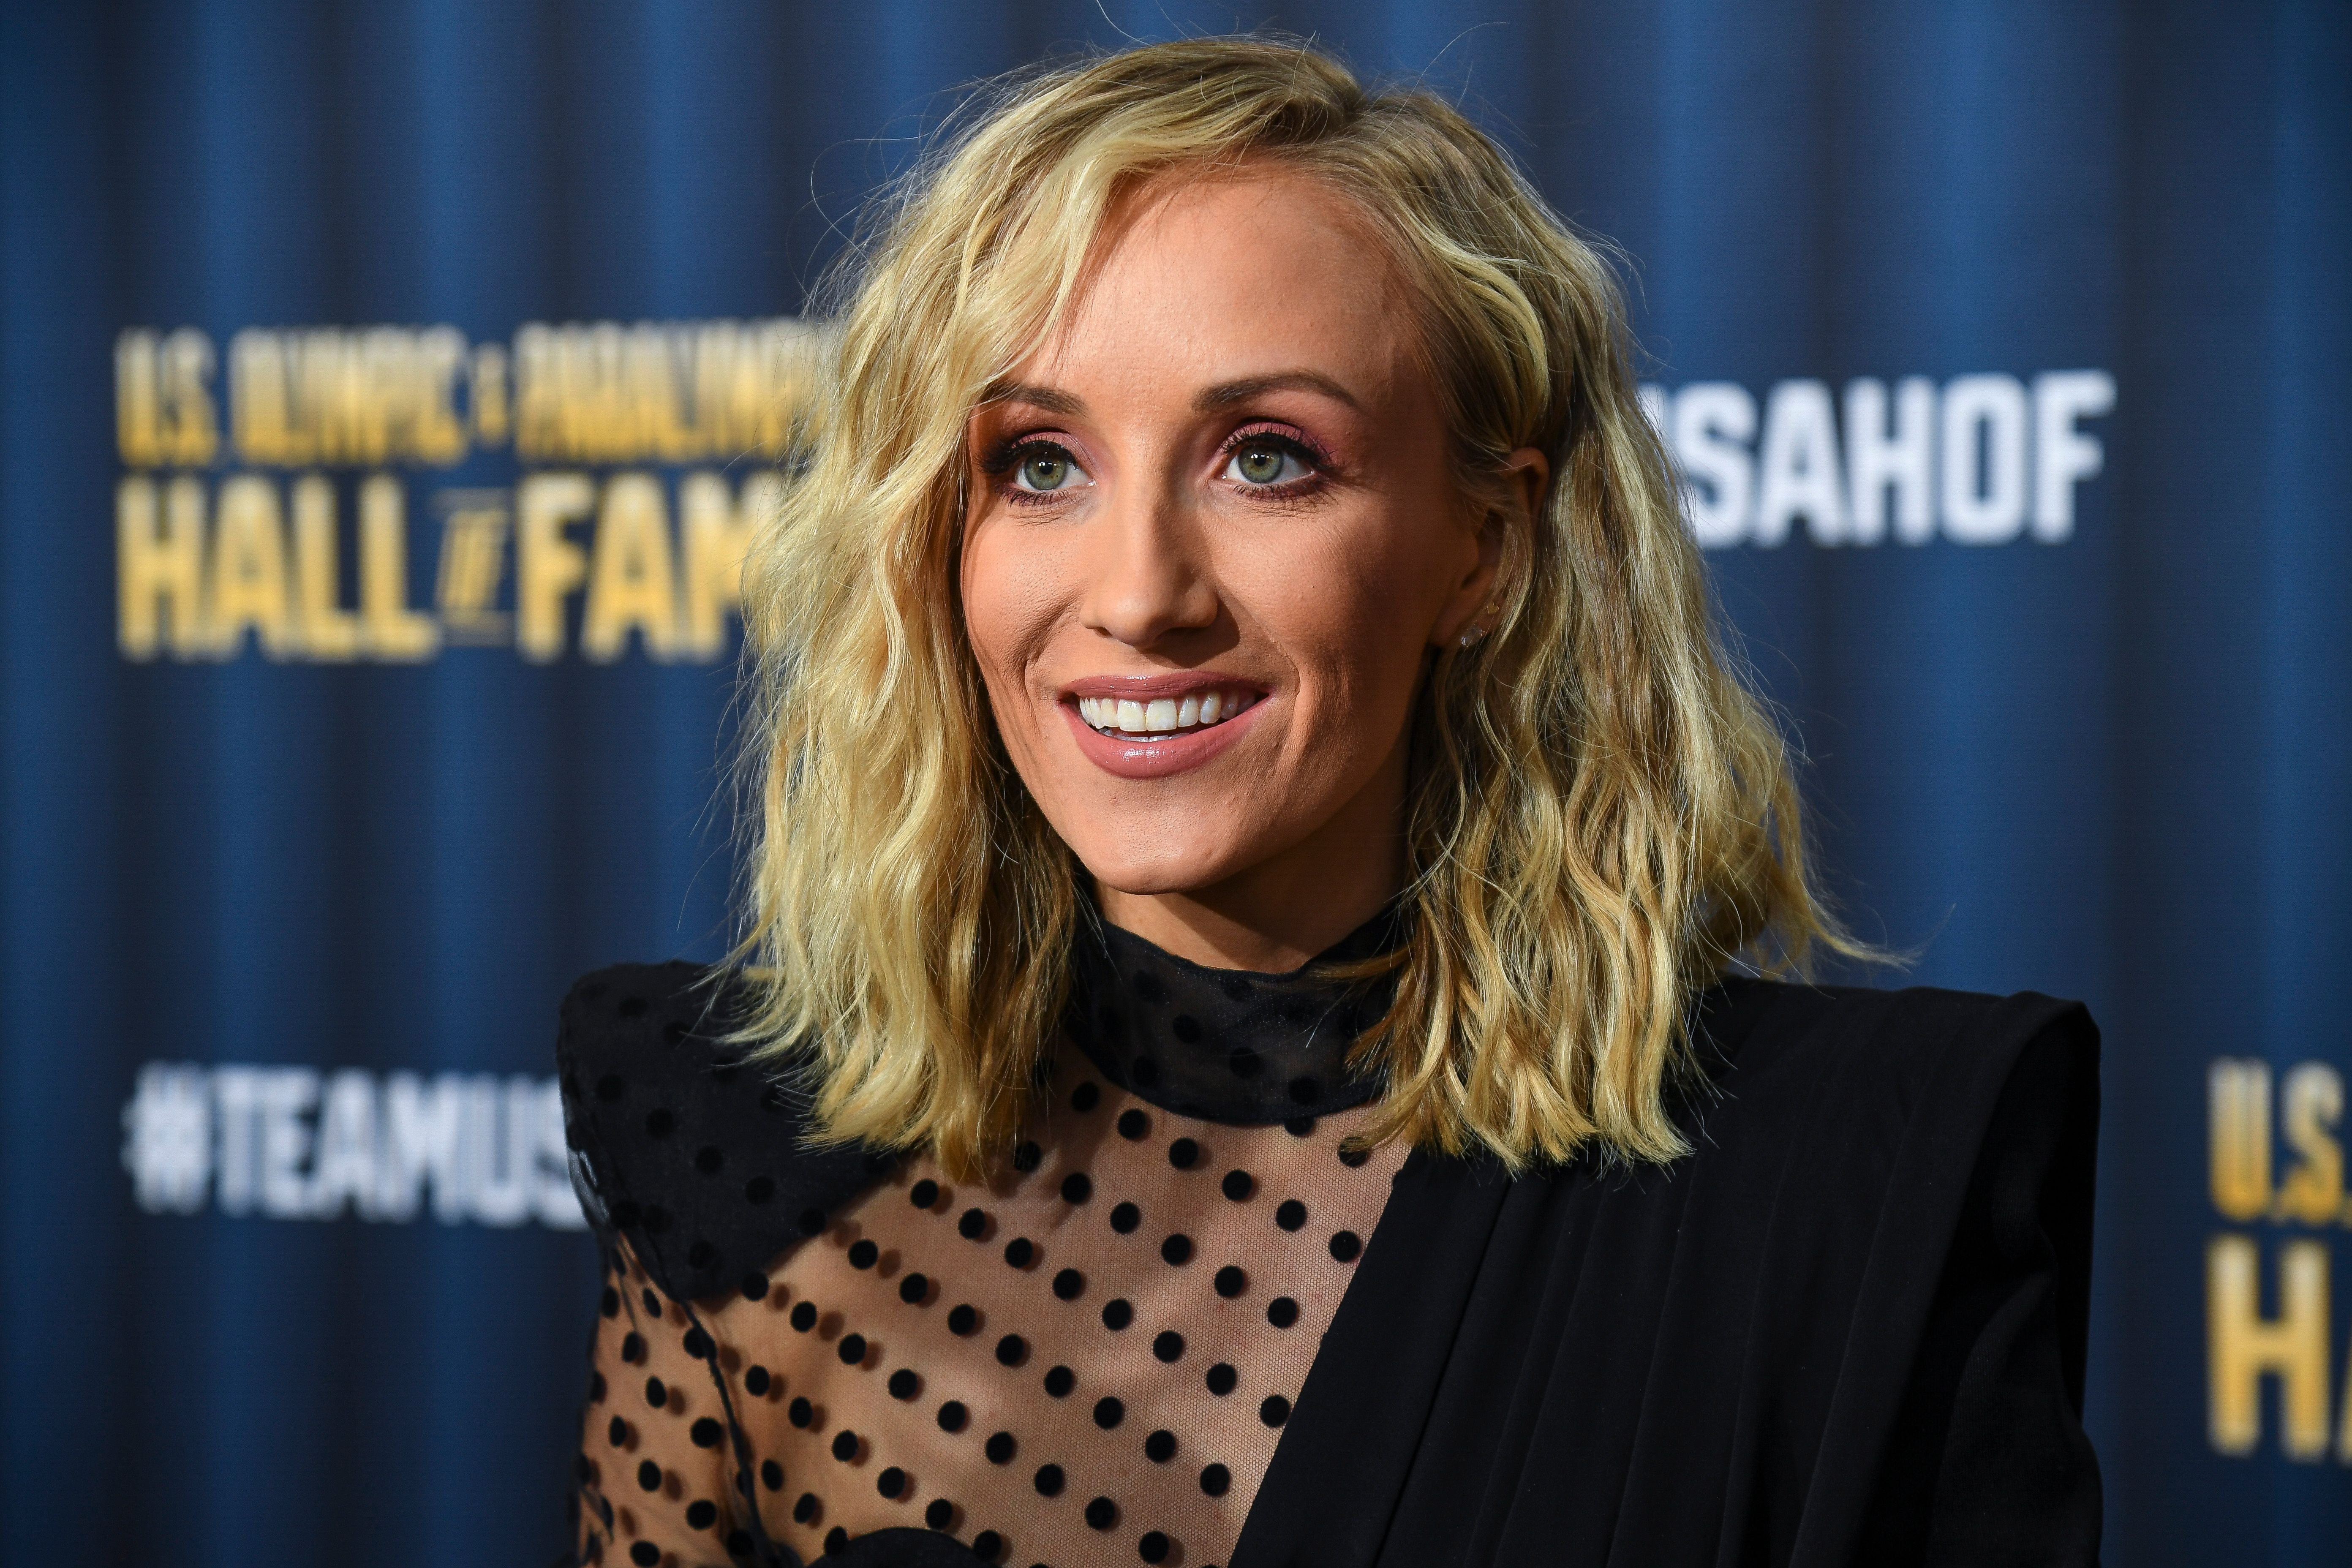 Gymnast Nastia Liukin at the U.S. Olympic Hall of Fame Class of 2019 Induction Ceremony on November 1, 2019 | Photo: Getty Images